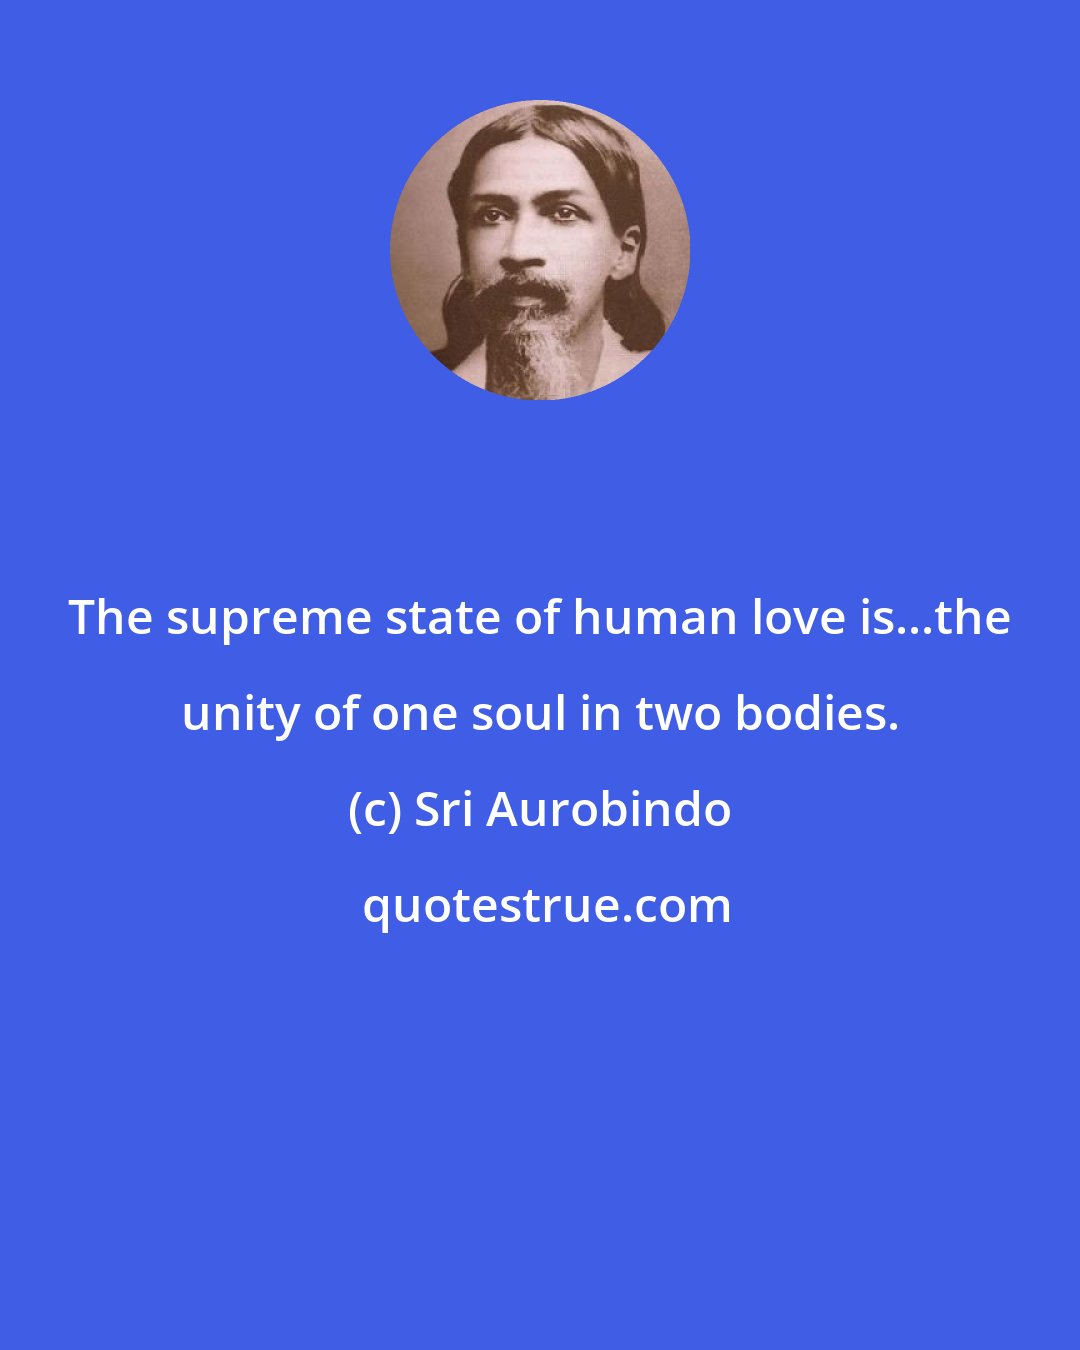 Sri Aurobindo: The supreme state of human love is...the unity of one soul in two bodies.